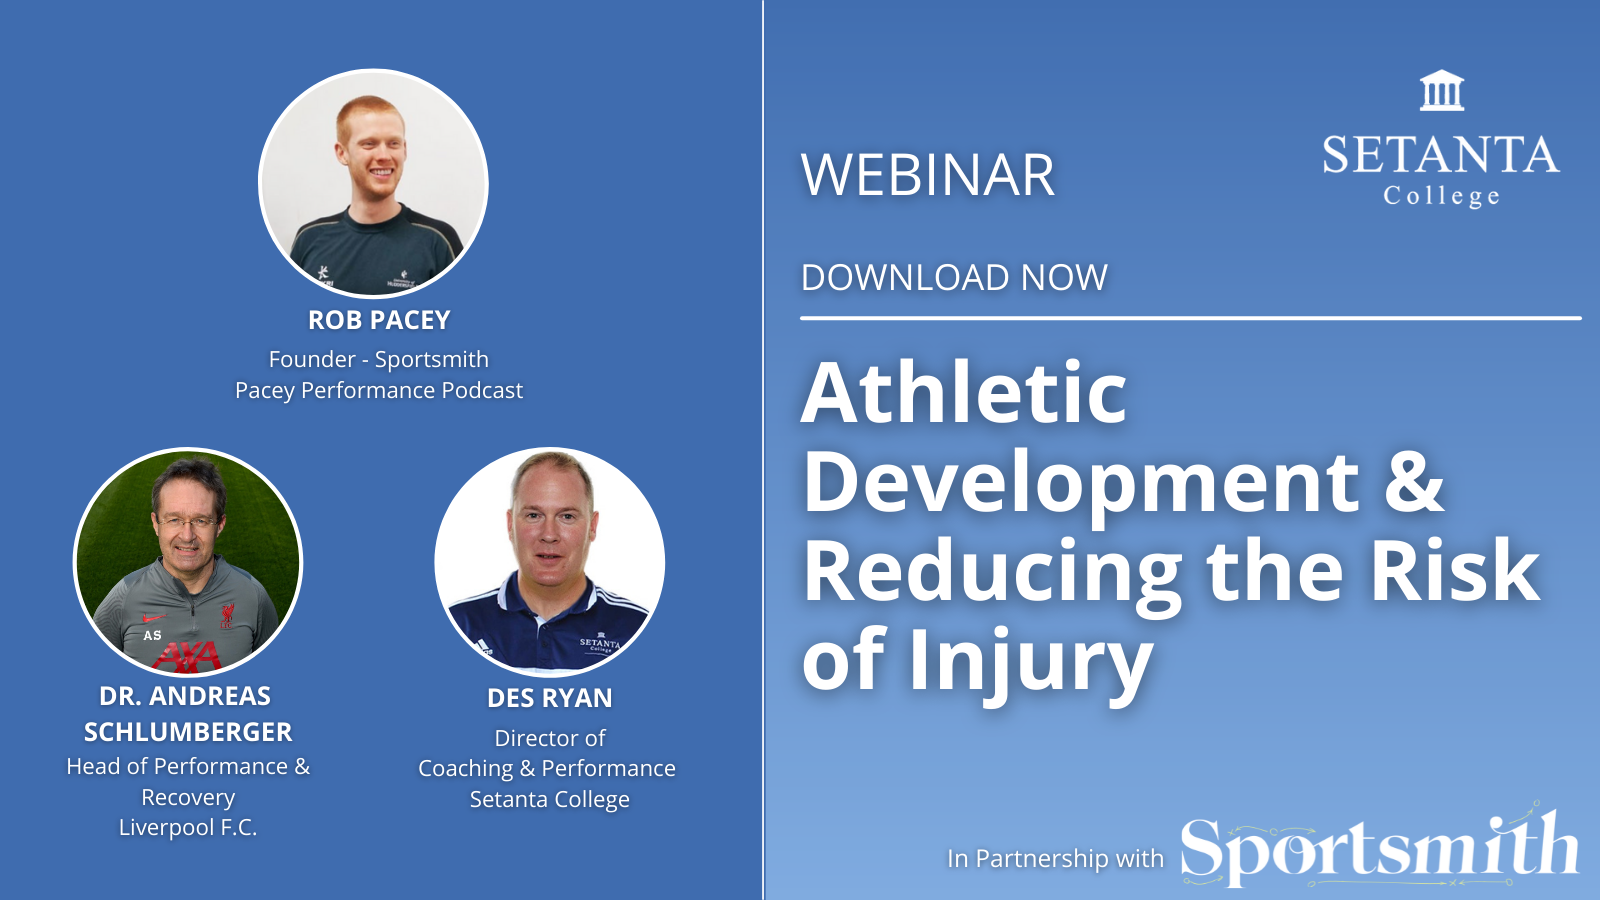 Athletic Development & Reducing the Risk of Injury